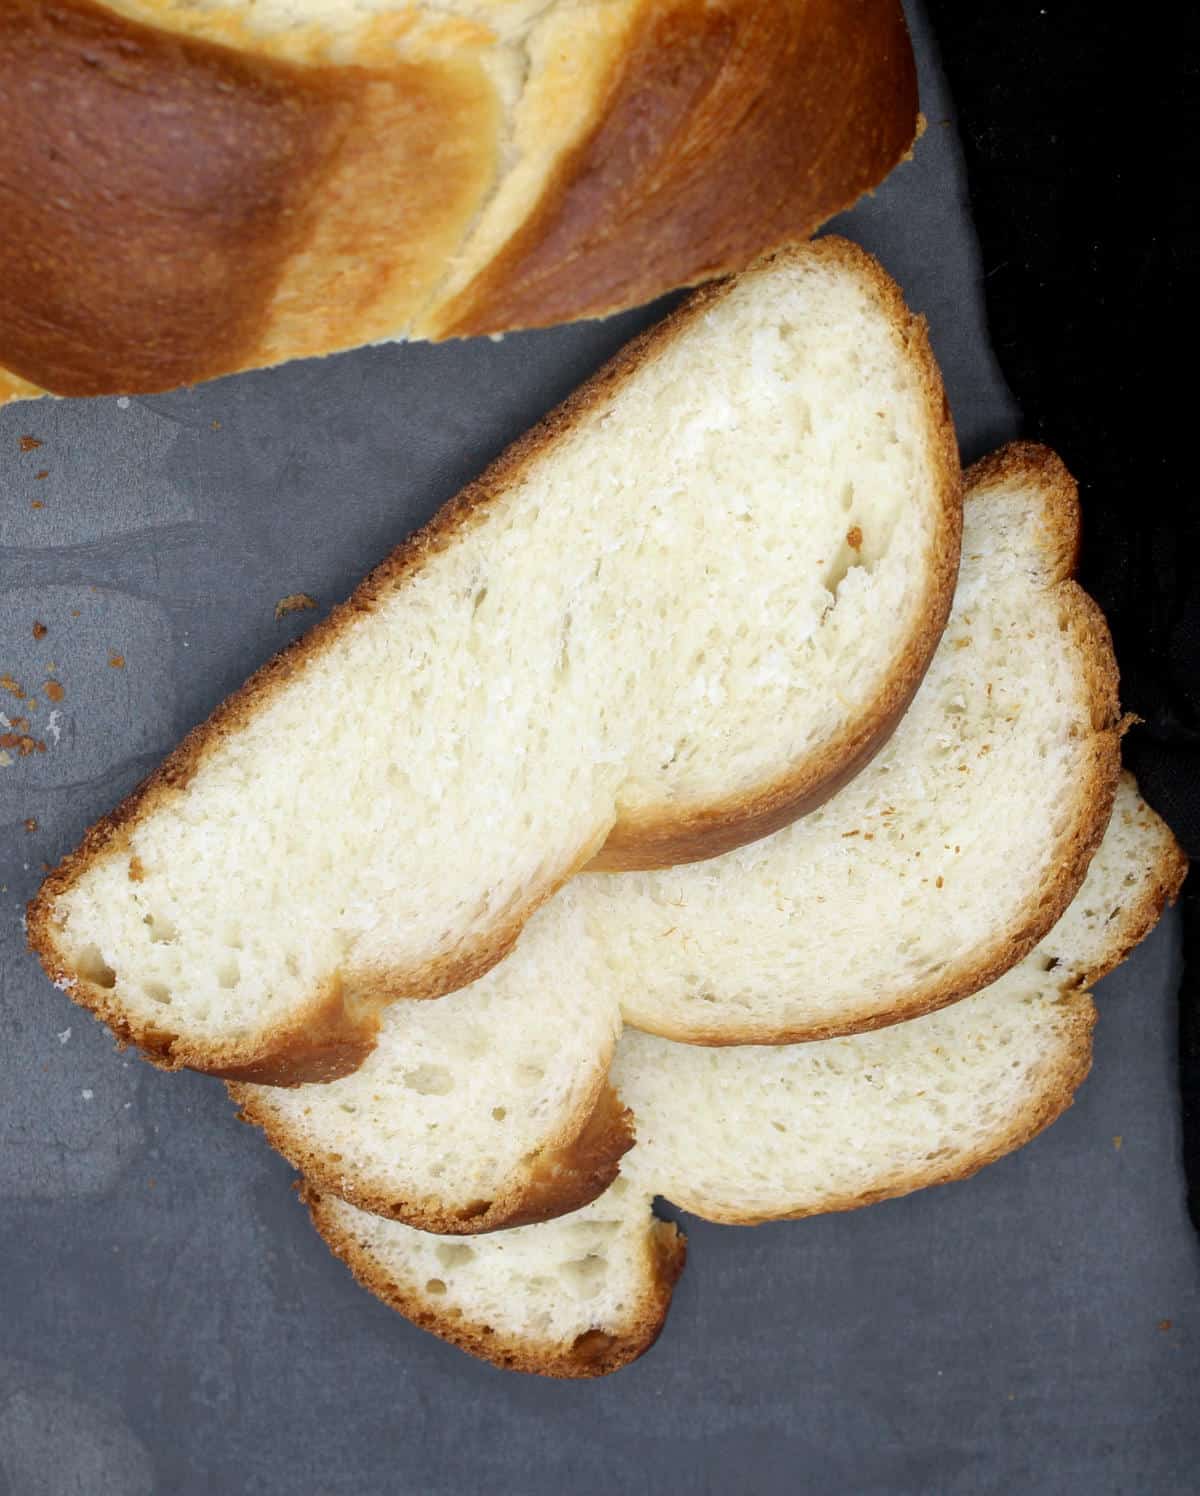 Slices of vegan challah bread on gray background.